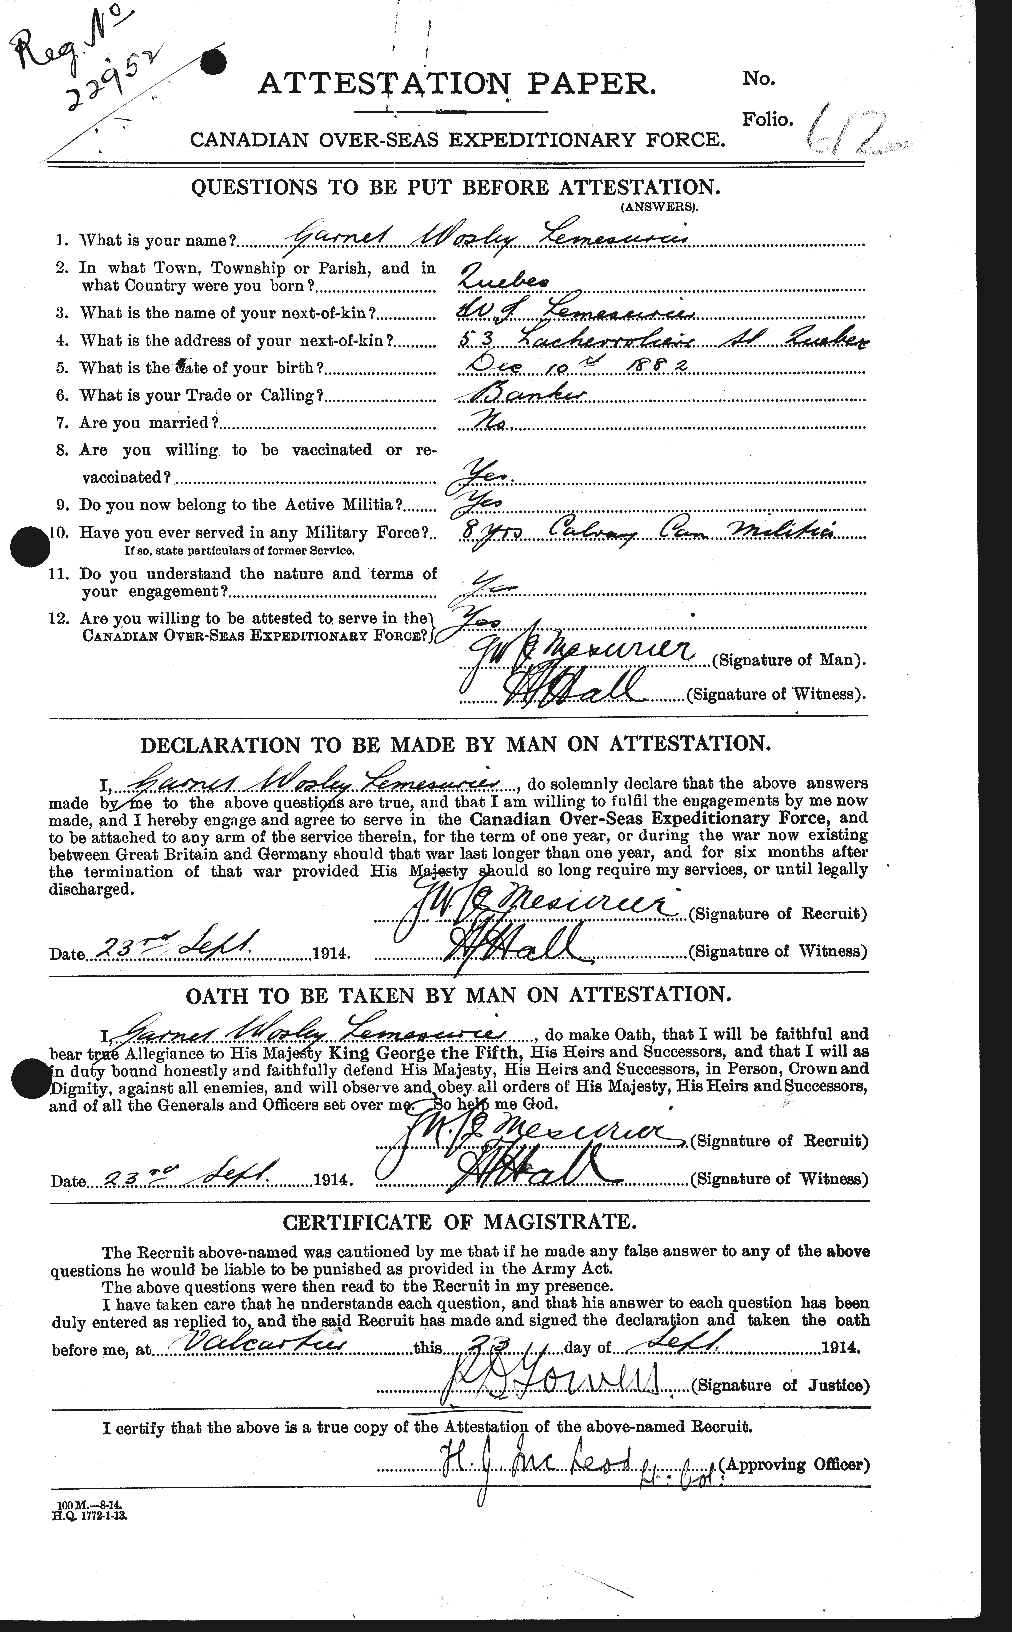 Personnel Records of the First World War - CEF 465877a